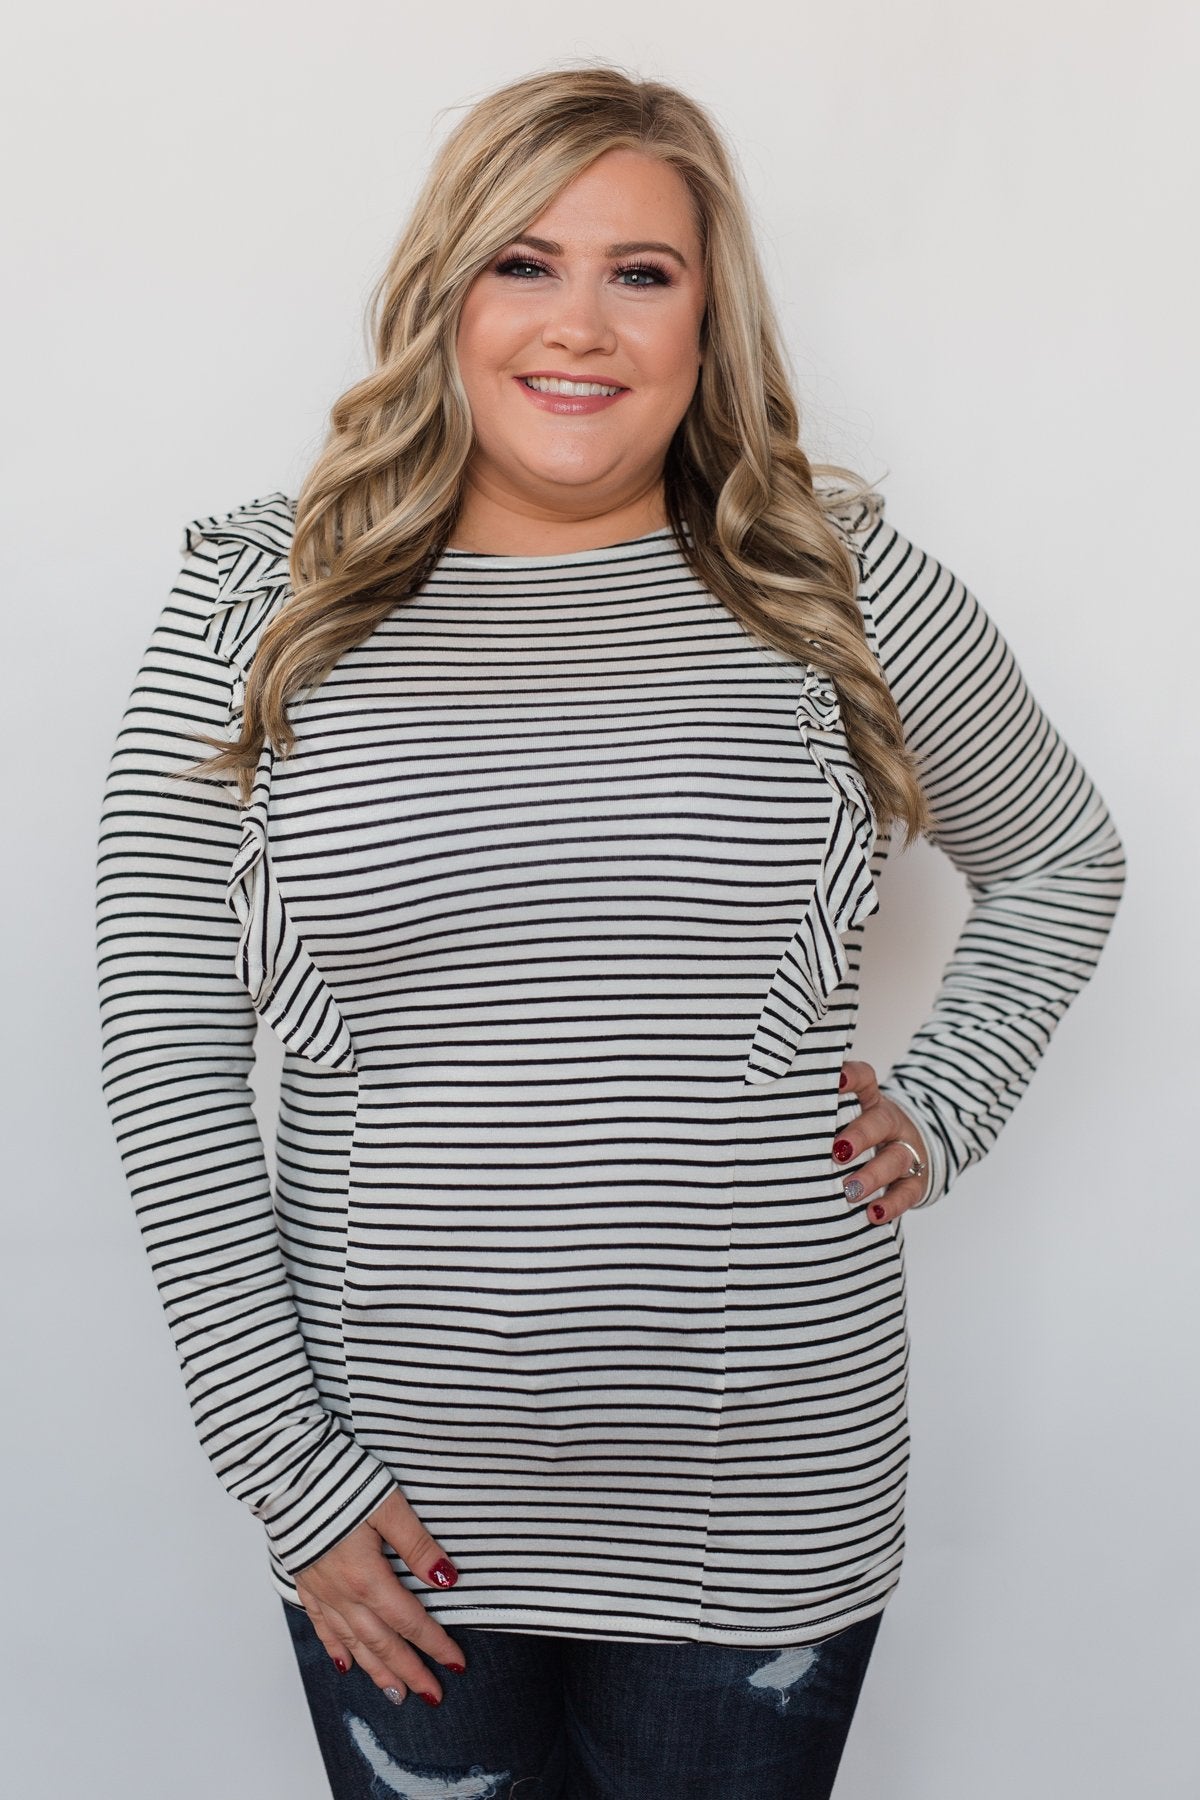 Radiant in Ruffles Long Sleeve Top - White